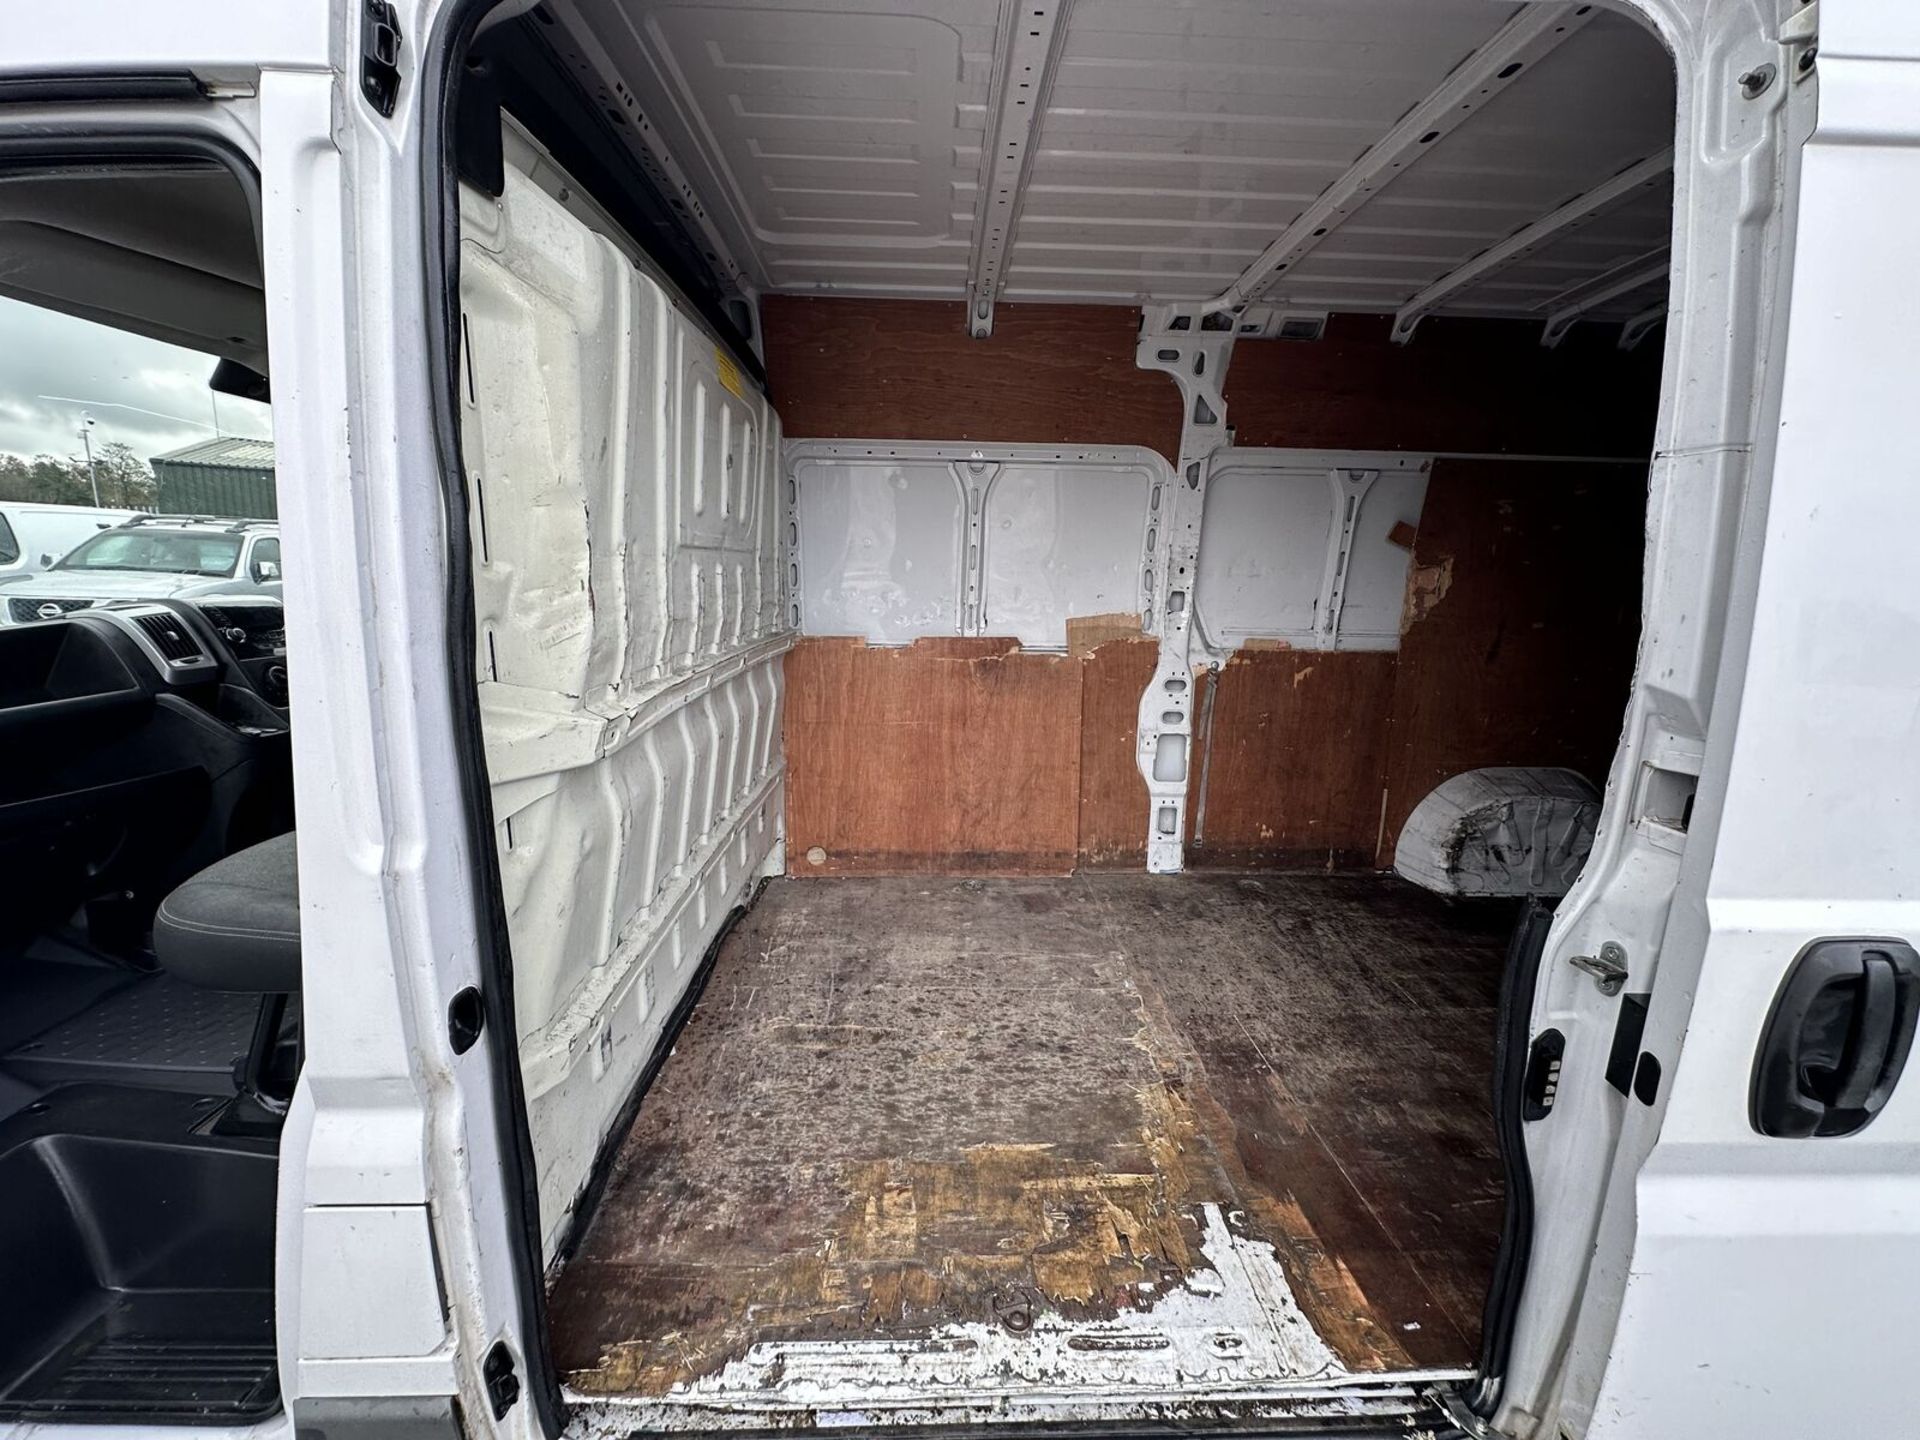 READY FOR ADVENTURE: 65 PLATE DUCATO 35 MULTIJET LWB - Image 14 of 19